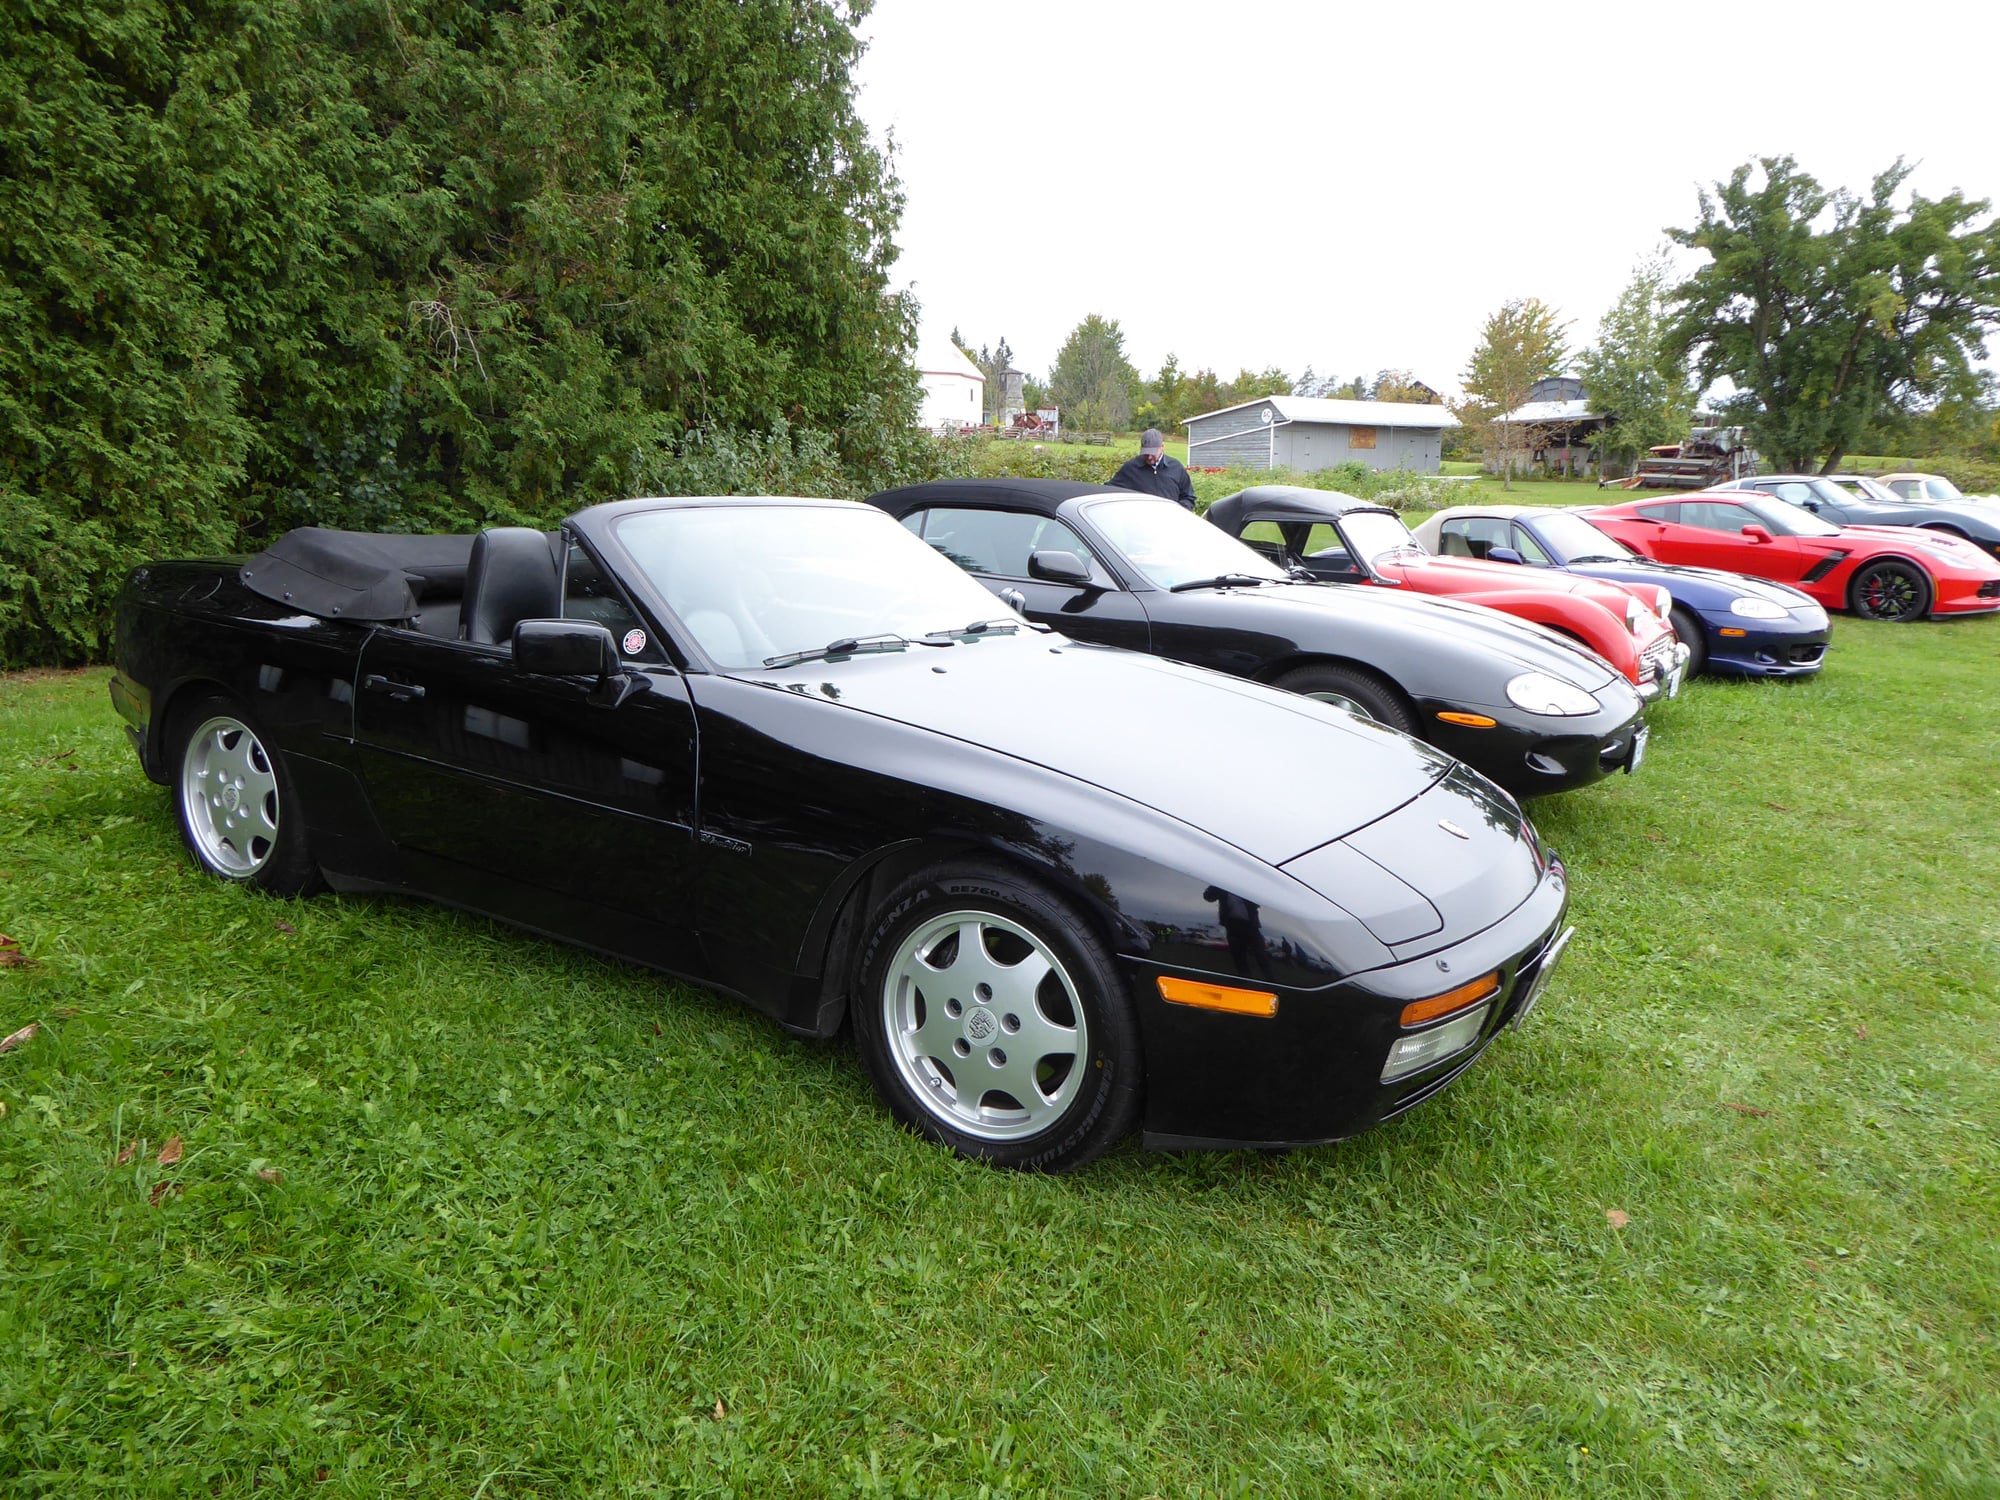 1989 Porsche 944 - Very clean pampered original 2 owner 944 S2 Cab in Ontario - Used - VIN WP0BA0941KN480146 - 171,000 Miles - 4 cyl - 2WD - Manual - Convertible - Black - Barrie, ON L0L2N0, Canada